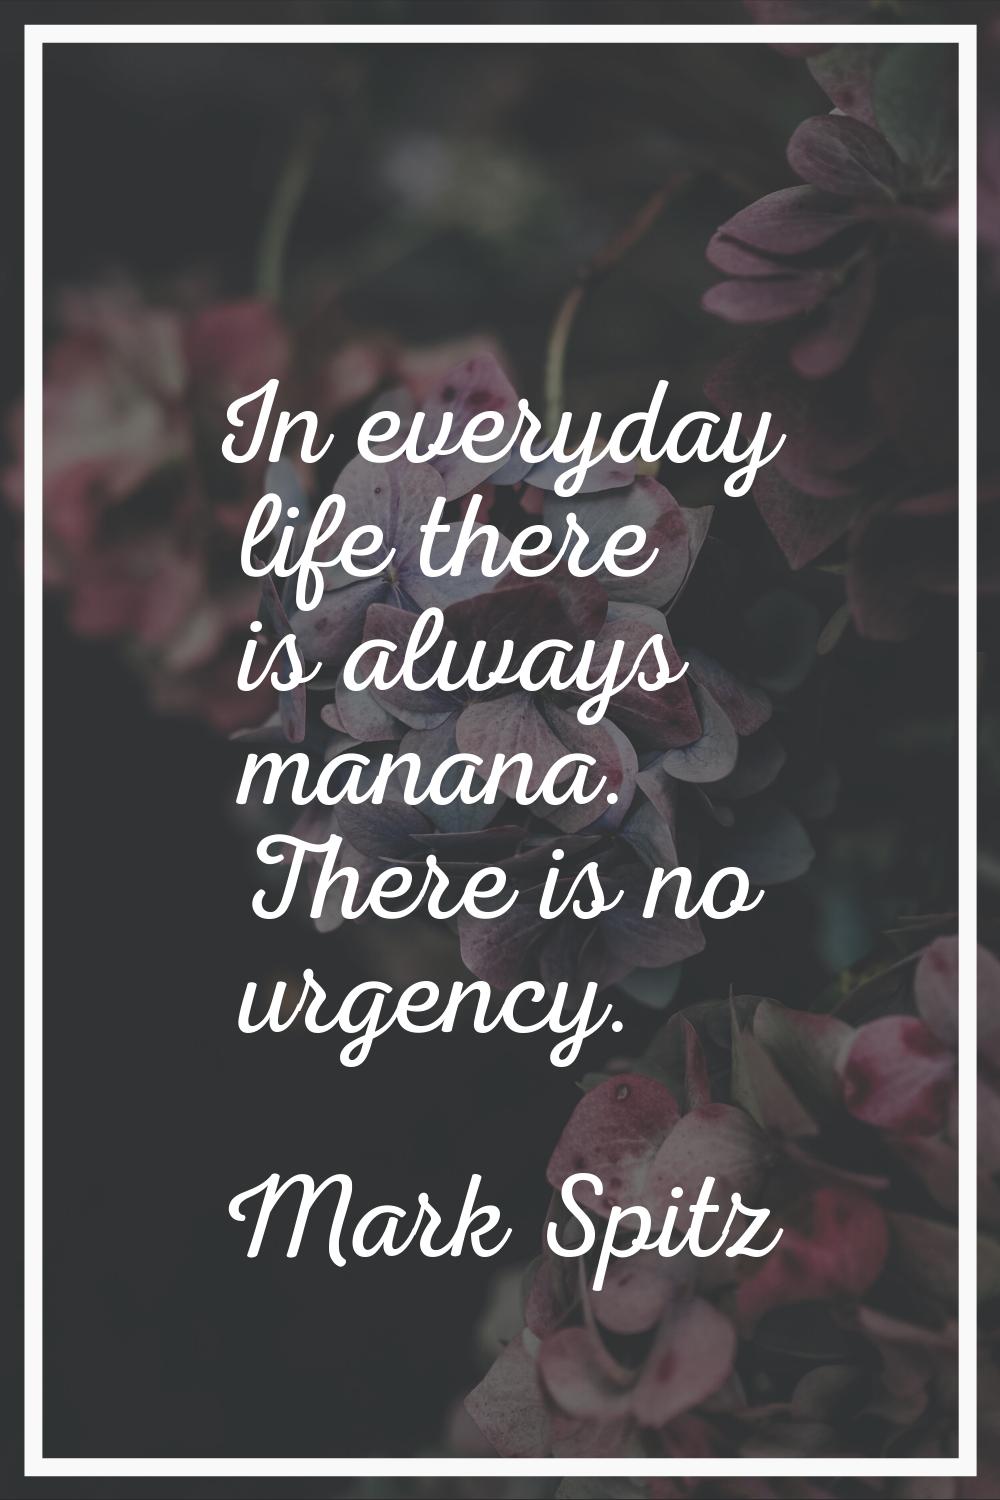 In everyday life there is always manana. There is no urgency.